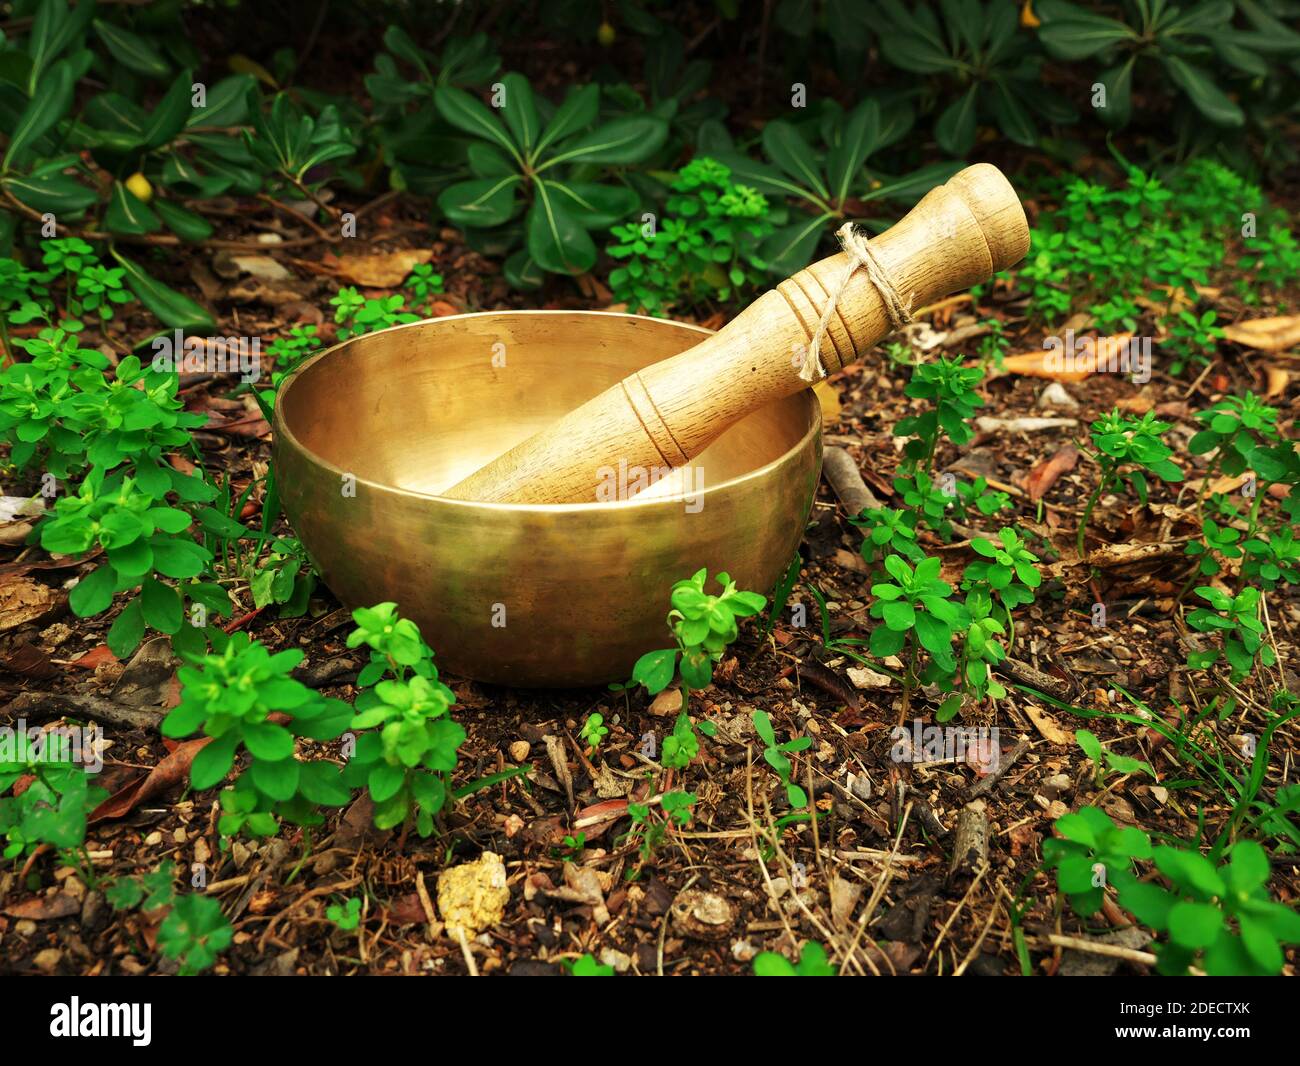 Singing bowl placed in the nature in the middle of small green plants Stock Photo